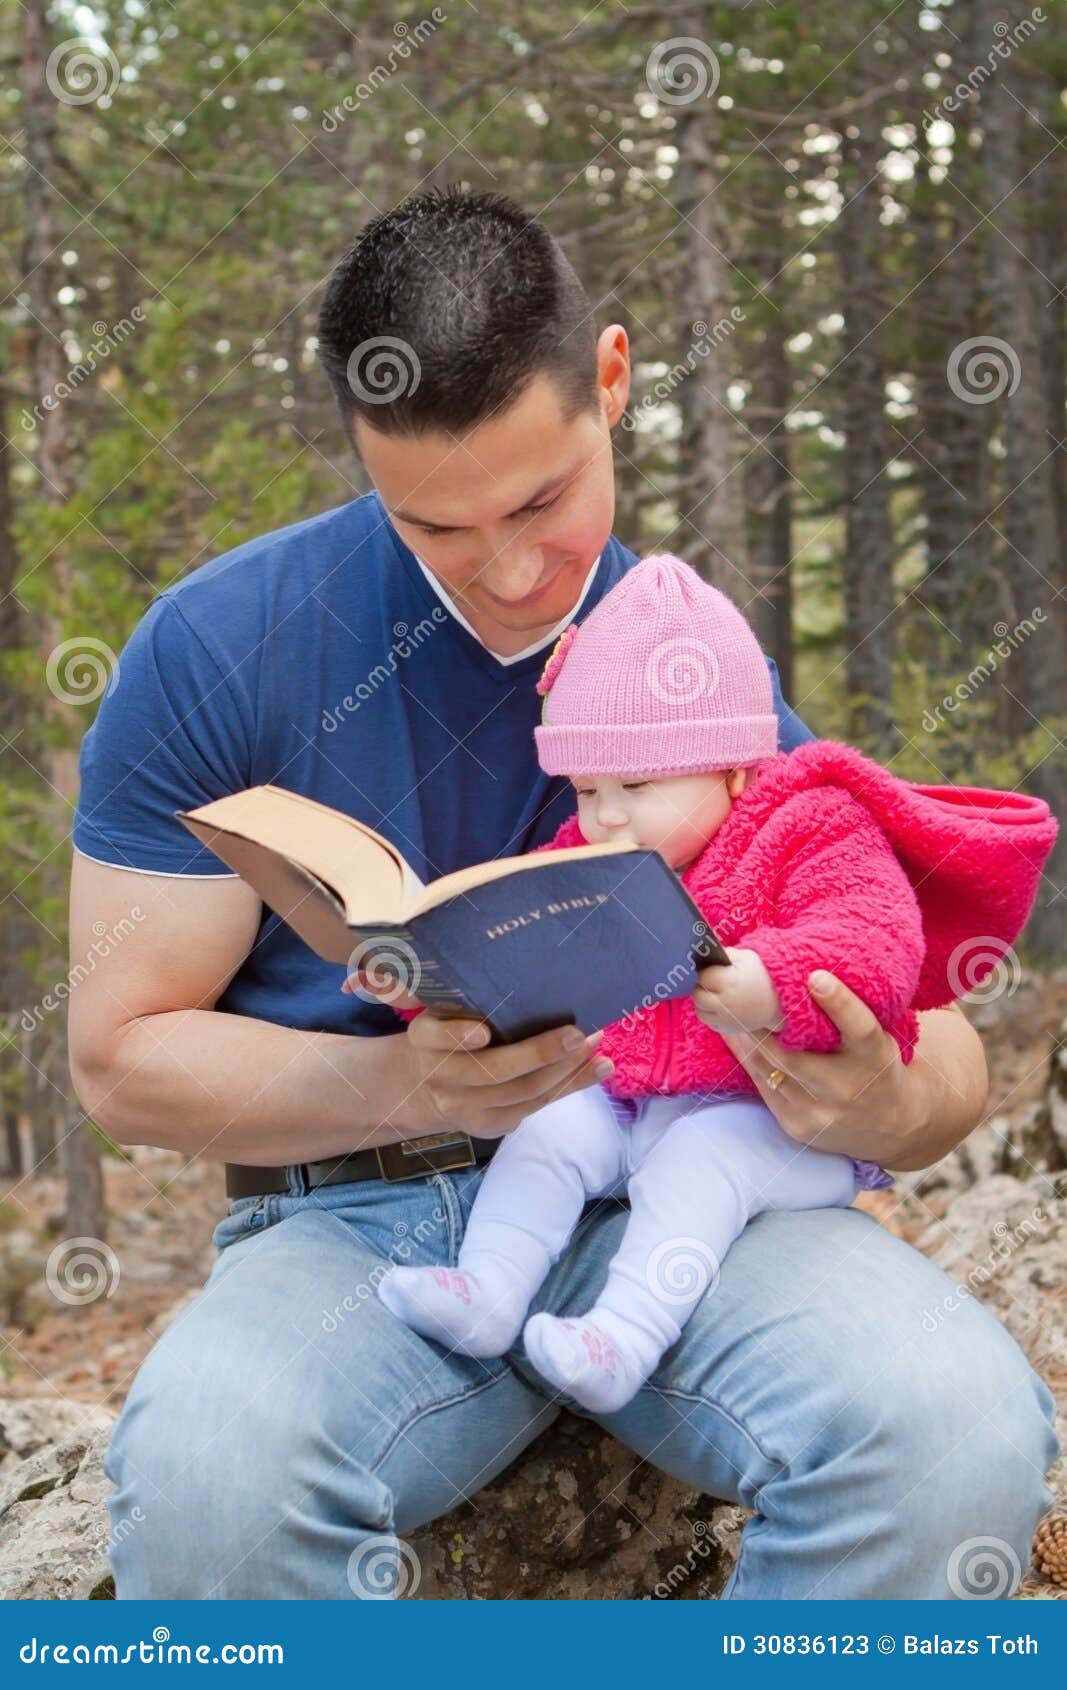 dad and baby daughter reading bible